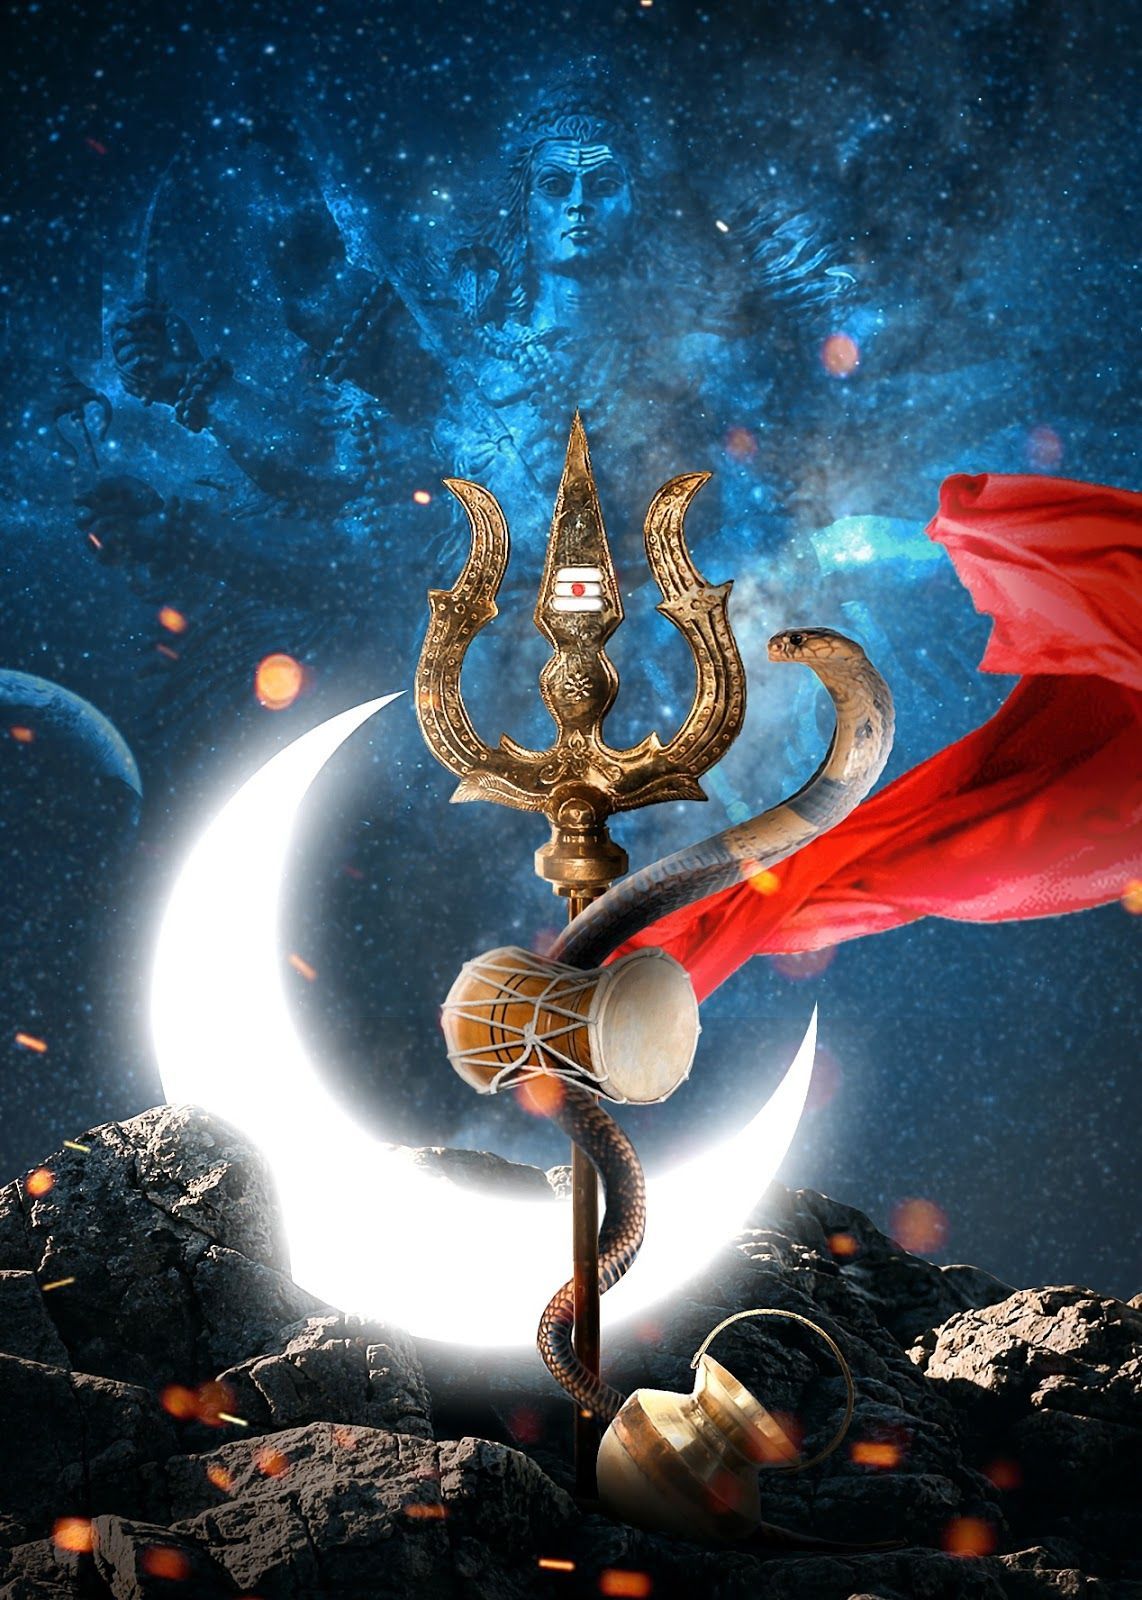 lord shiva photos for wallpaper
